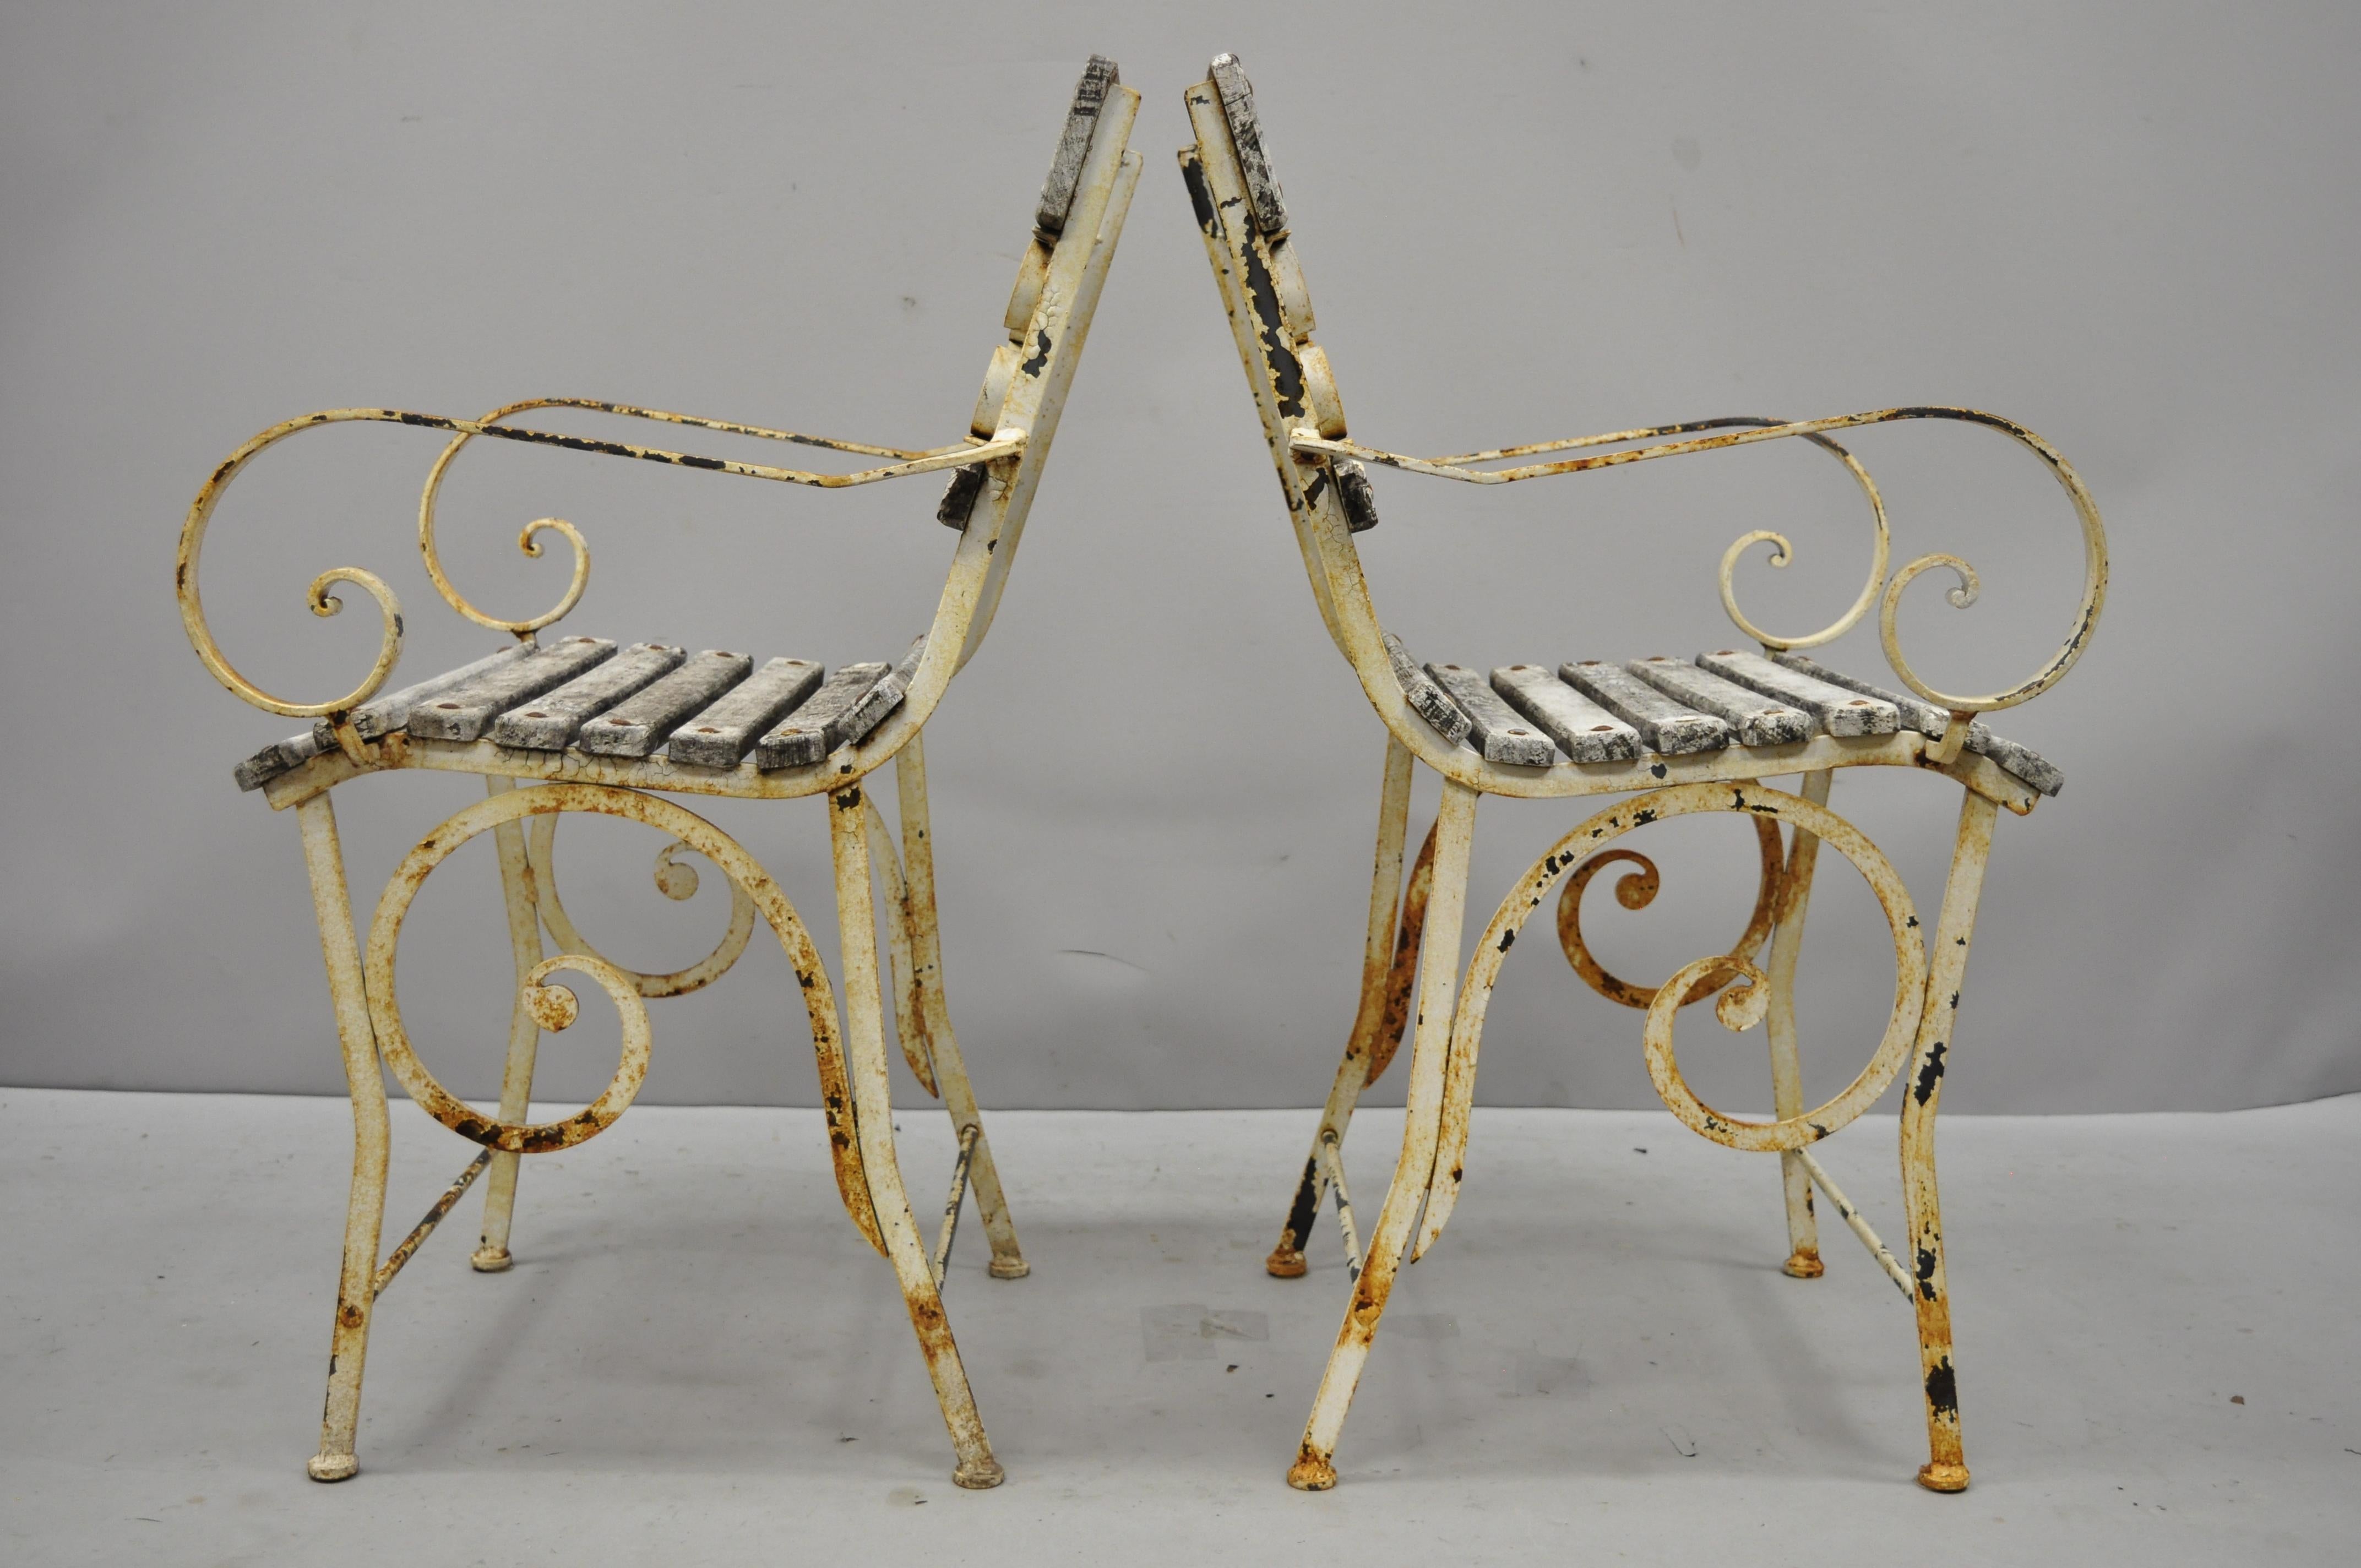 Victorian 2 French Wrought Iron Wood Slat Seat Garden Arm Chairs by Maison Provence & Fils